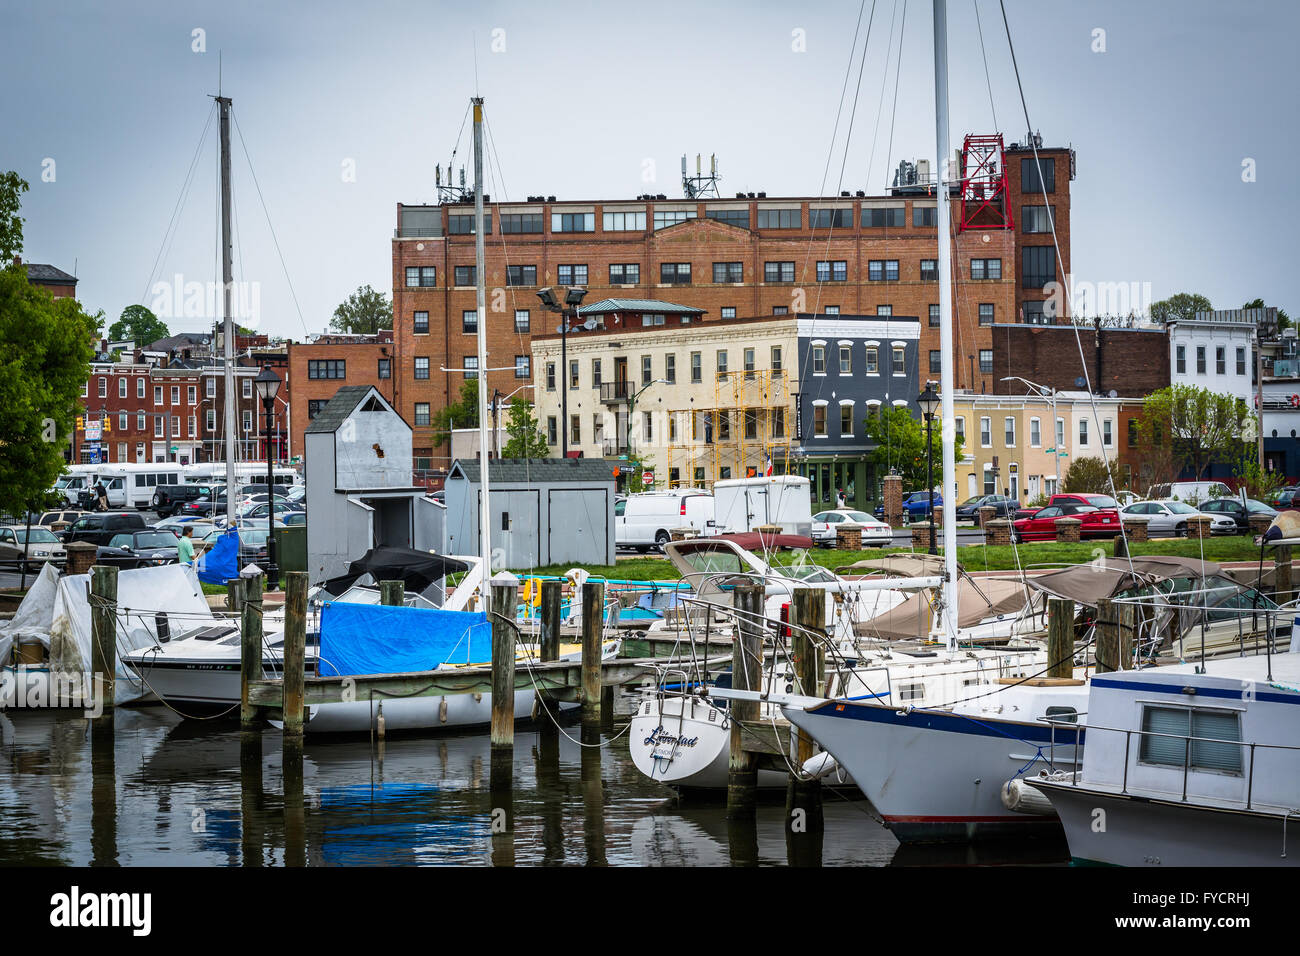 Boats and buildings in Fells Point, Baltimore, Maryland. Stock Photo